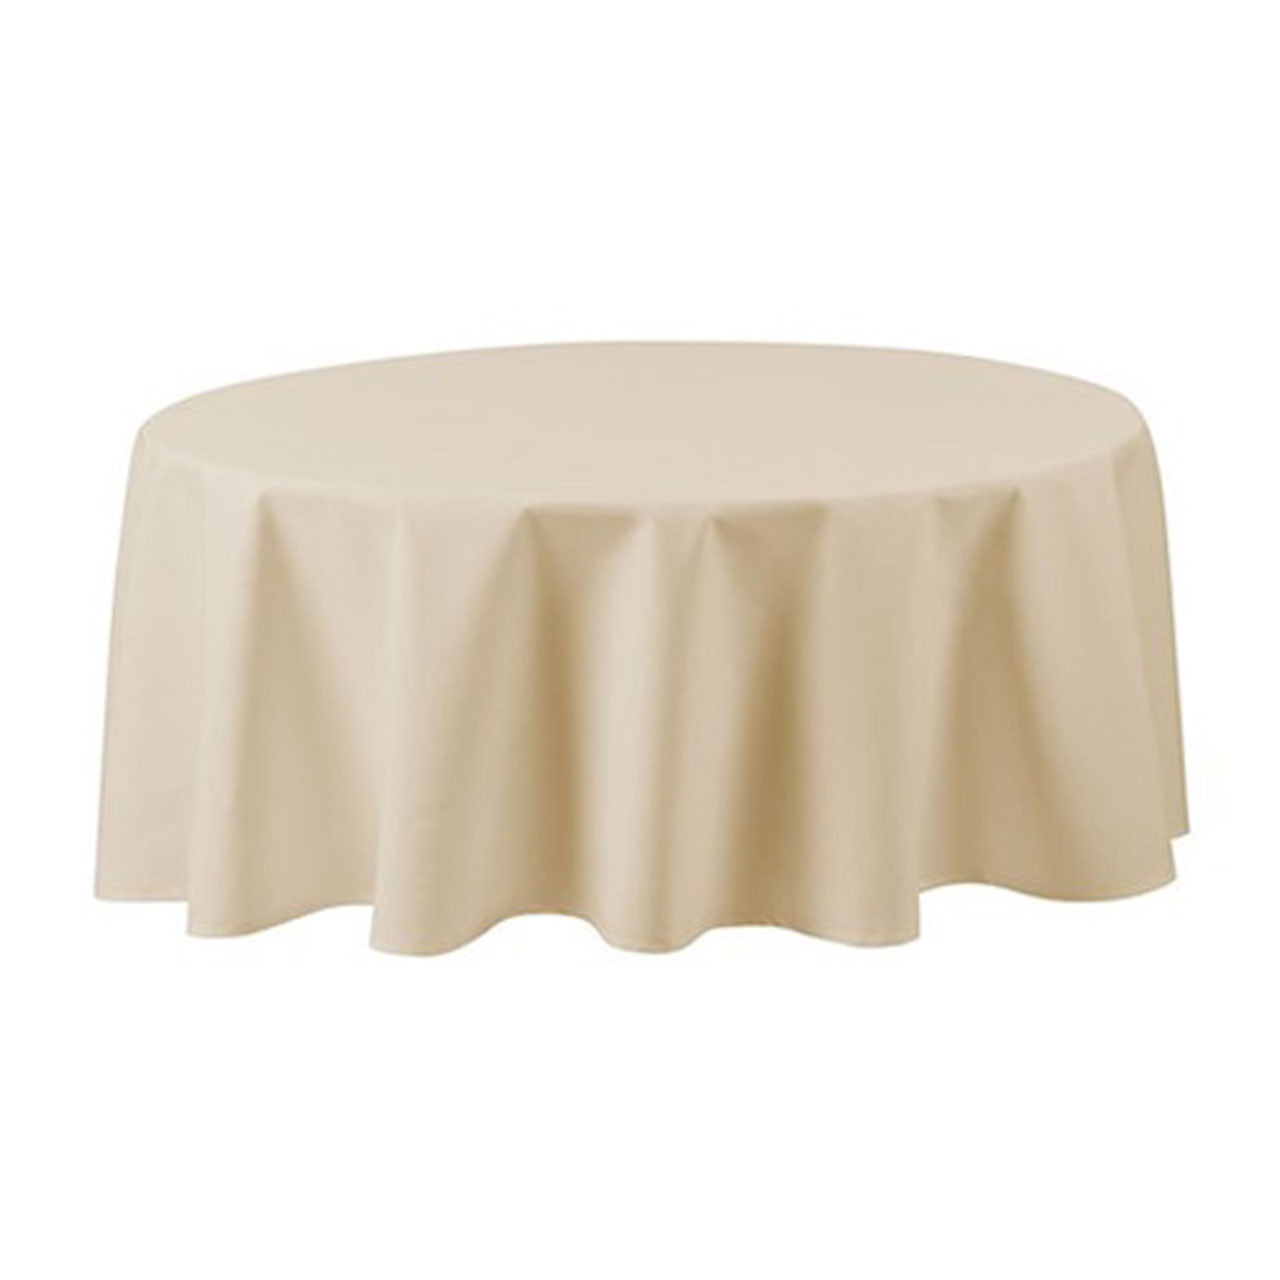 What size round table does a 120 tablecloth fit?